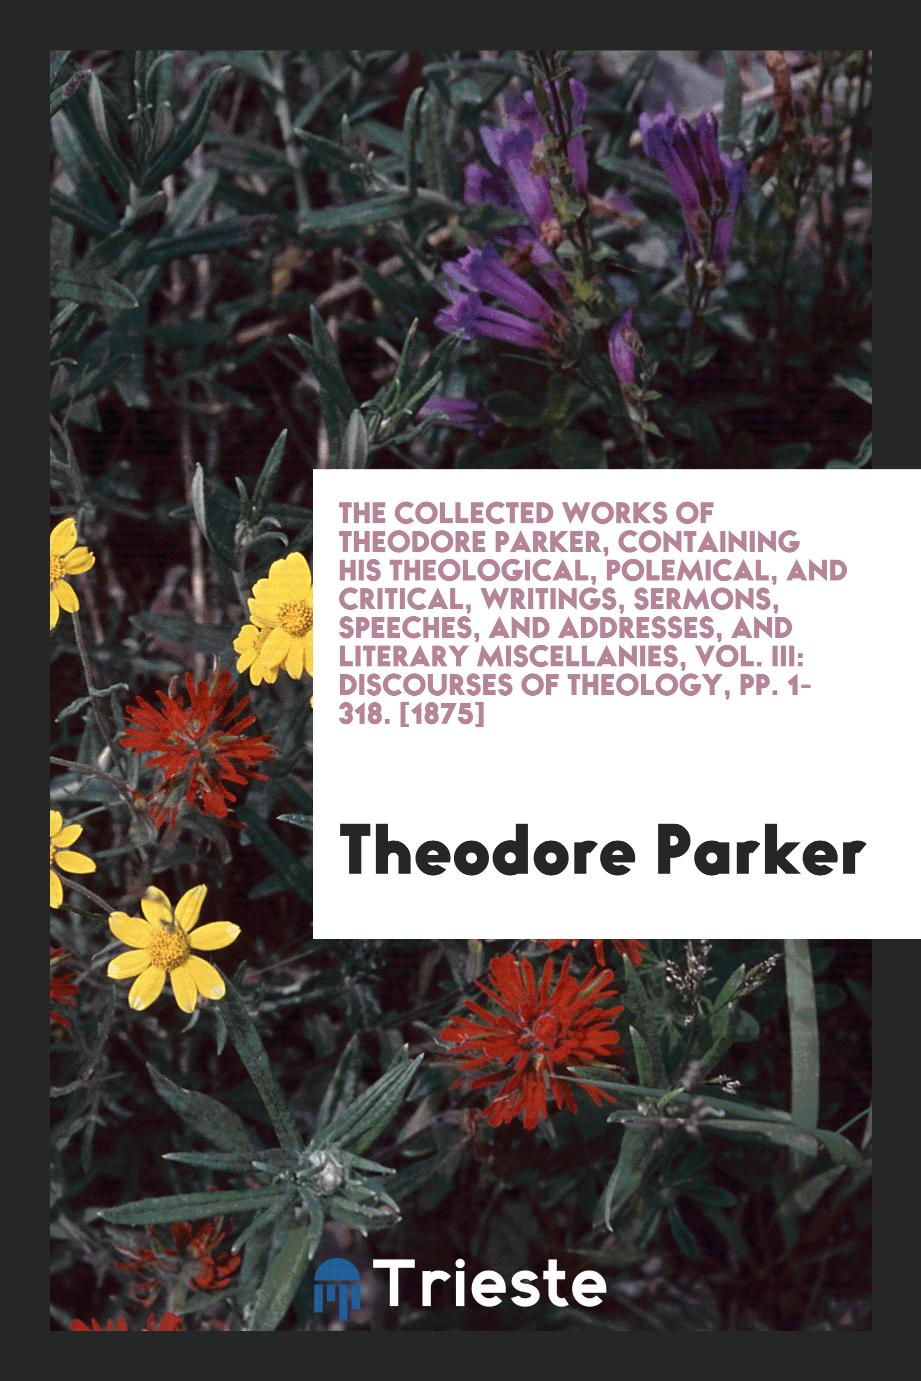 The Collected Works of Theodore Parker, Containing His Theological, Polemical, and Critical, Writings, Sermons, Speeches, and Addresses, and Literary Miscellanies, Vol. III: Discourses of Theology, pp. 1-318. [1875]